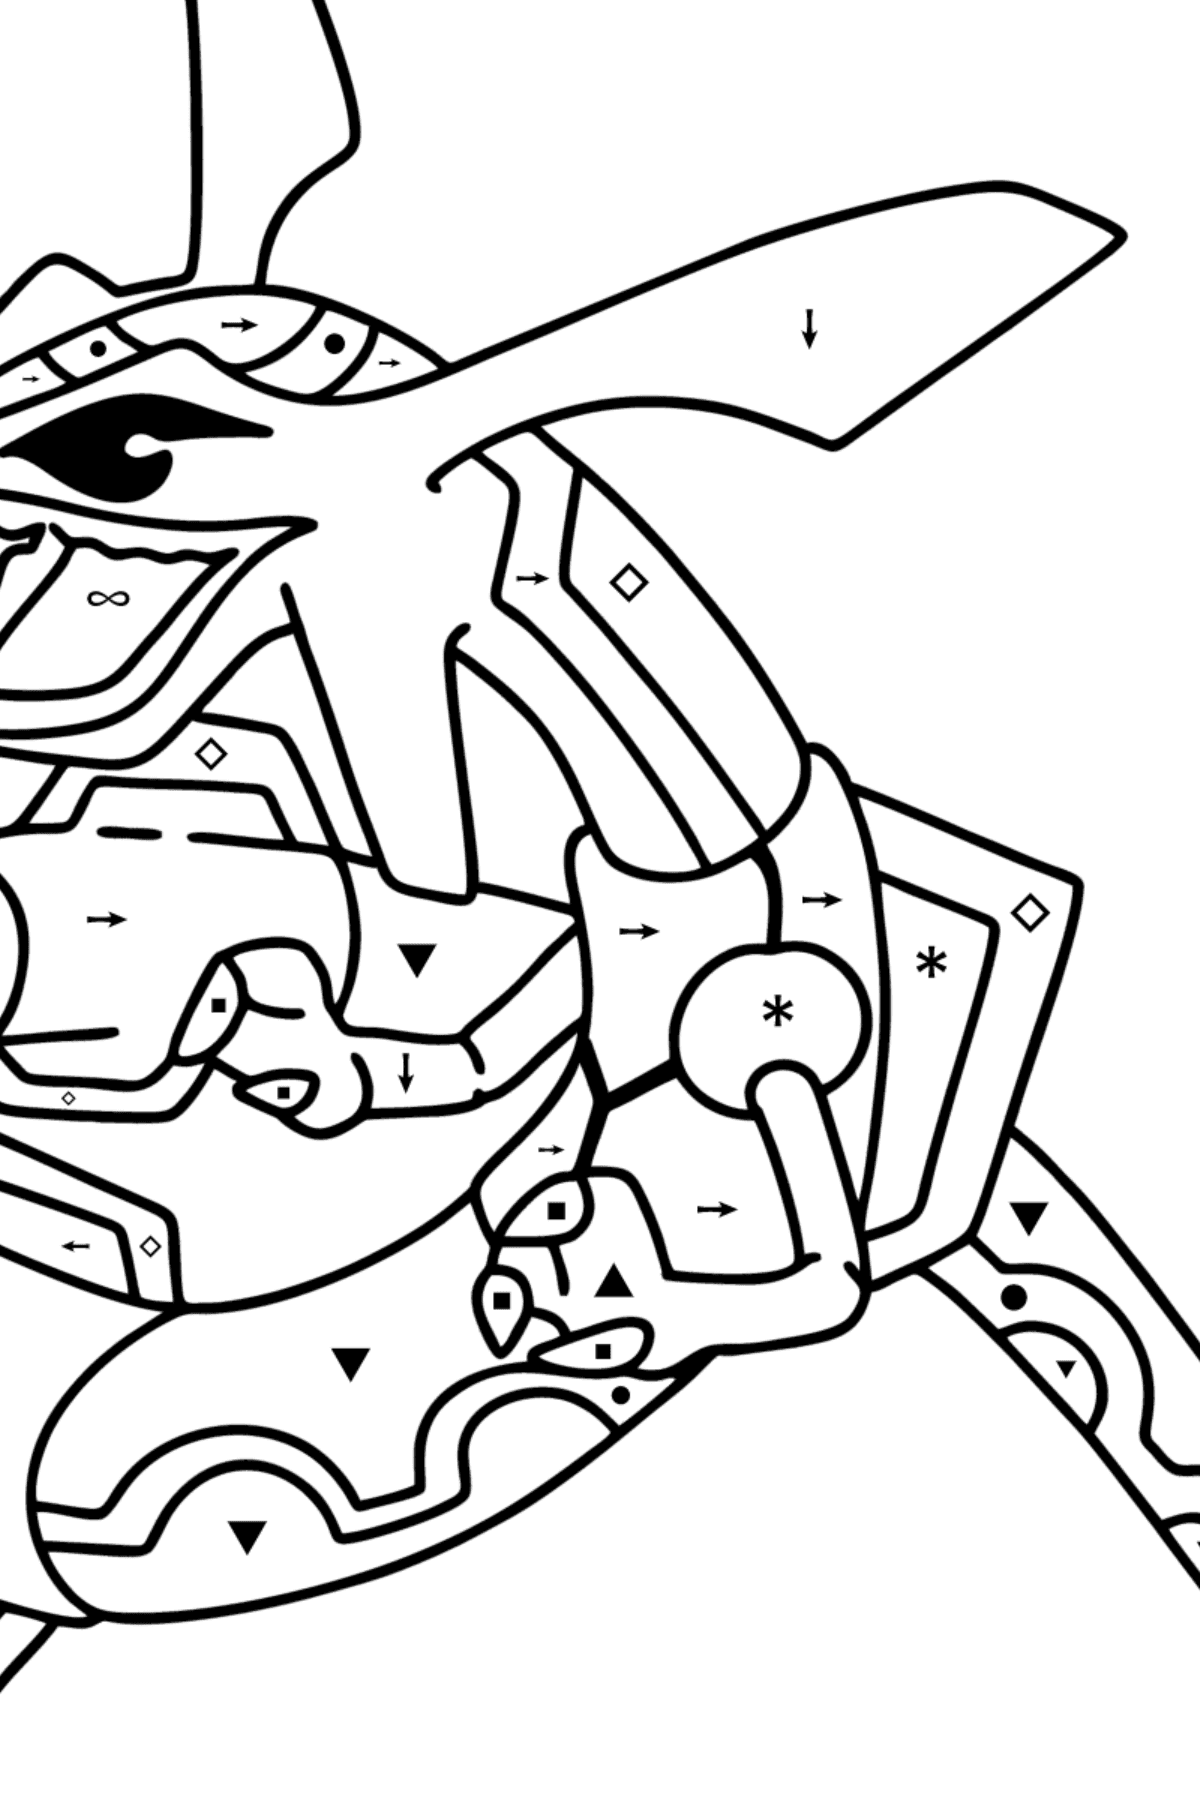 Coloring page Pokemon Go Rayquaza - Coloring by Symbols for Kids